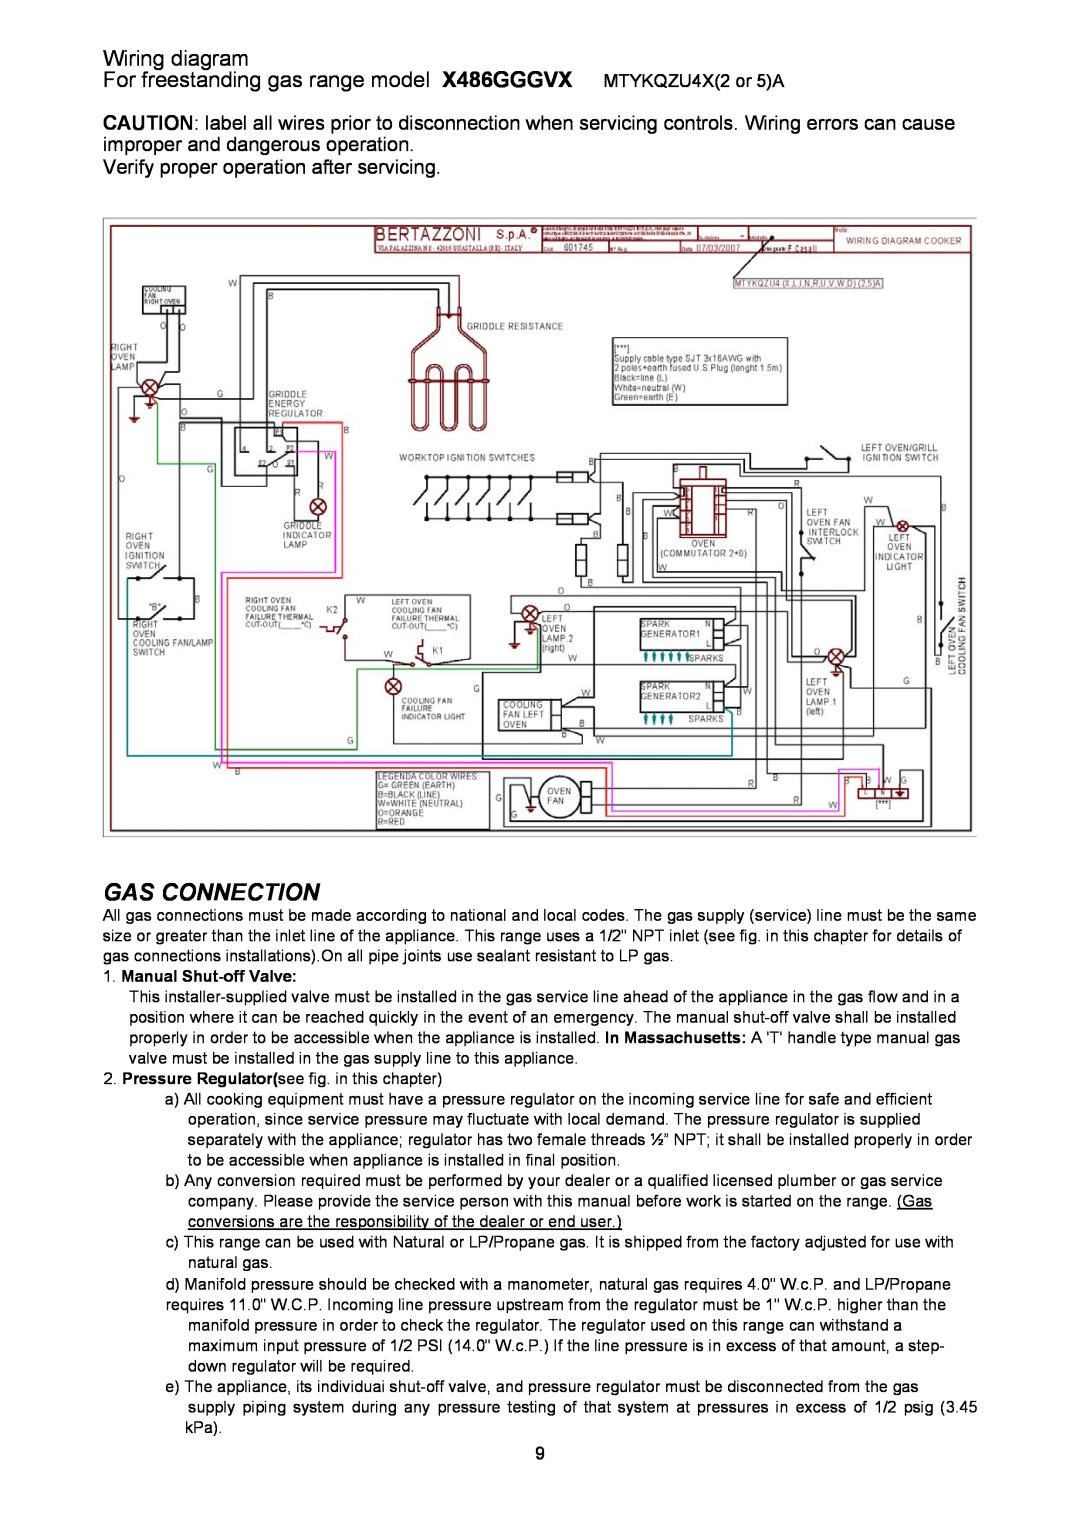 Bertazzoni X486GGGVX dimensions Gas Connection, Wiring diagram, Verify proper operation after servicing 